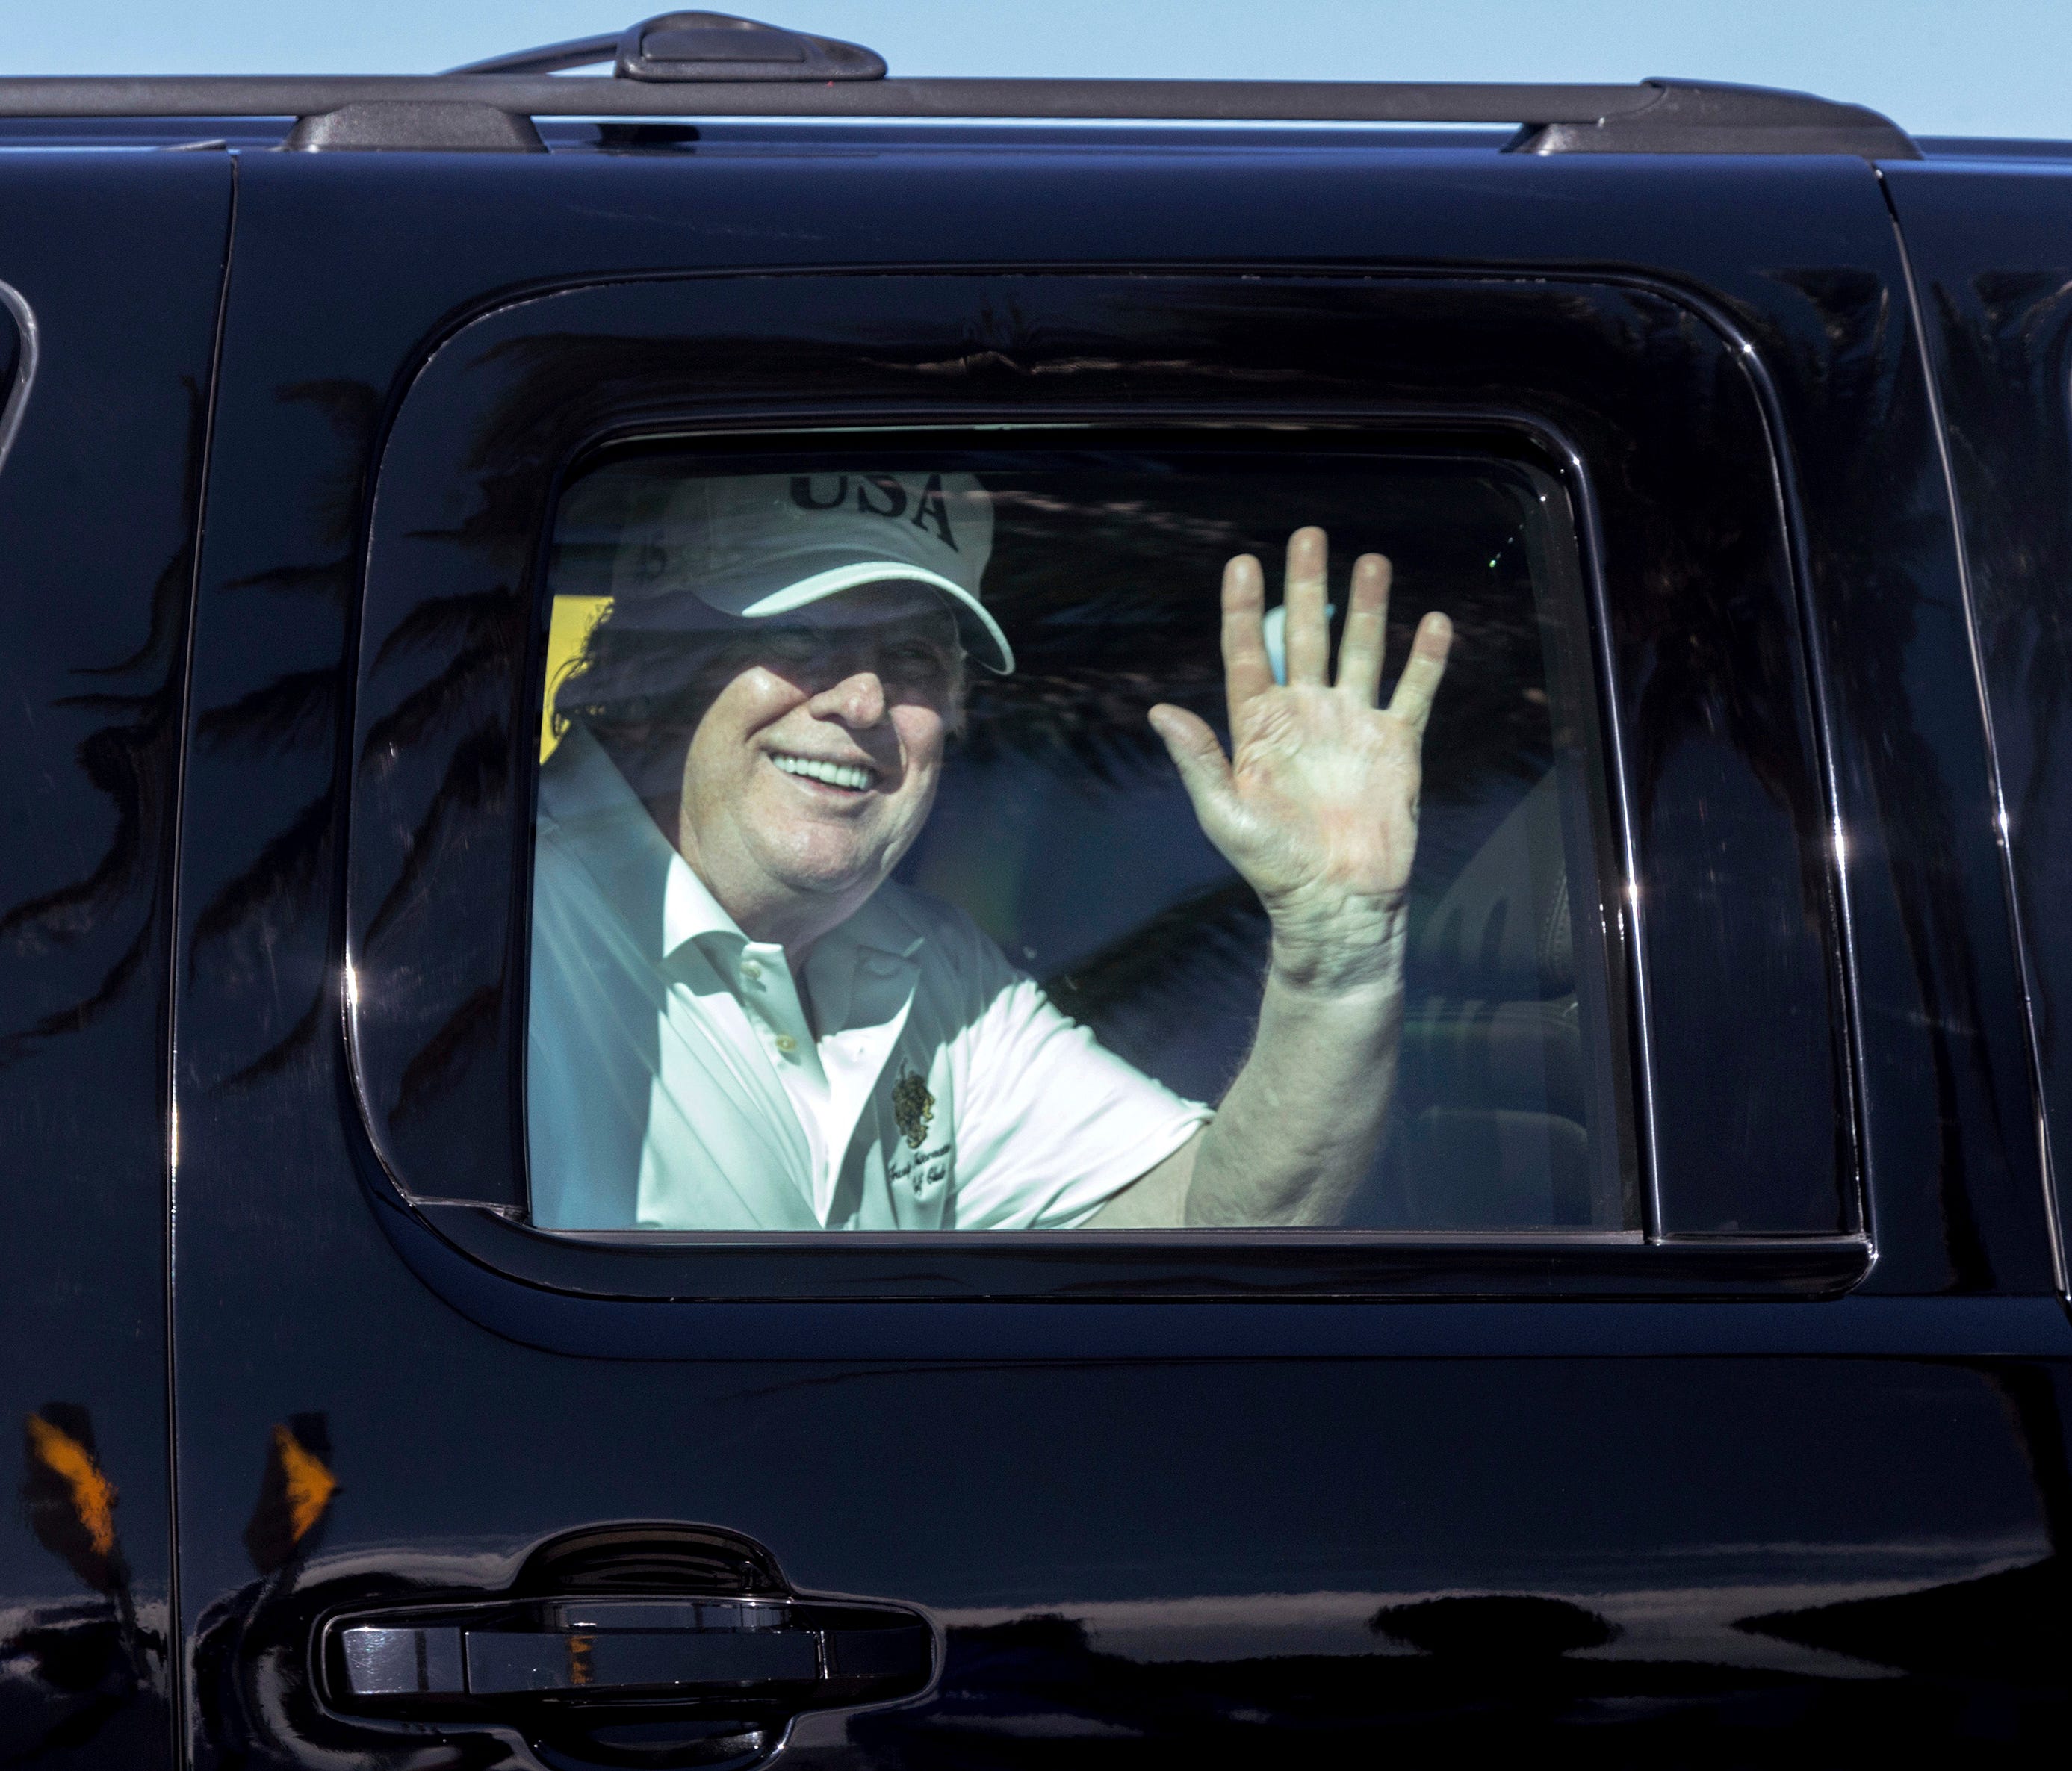 President Trump waves to supporters from his motorcade traveling along Southern Blvd. enroute to his Mar-a-Lago estate from Trump International Golf Club, Dec. 28, 2017, in West Palm Beach, Fla.